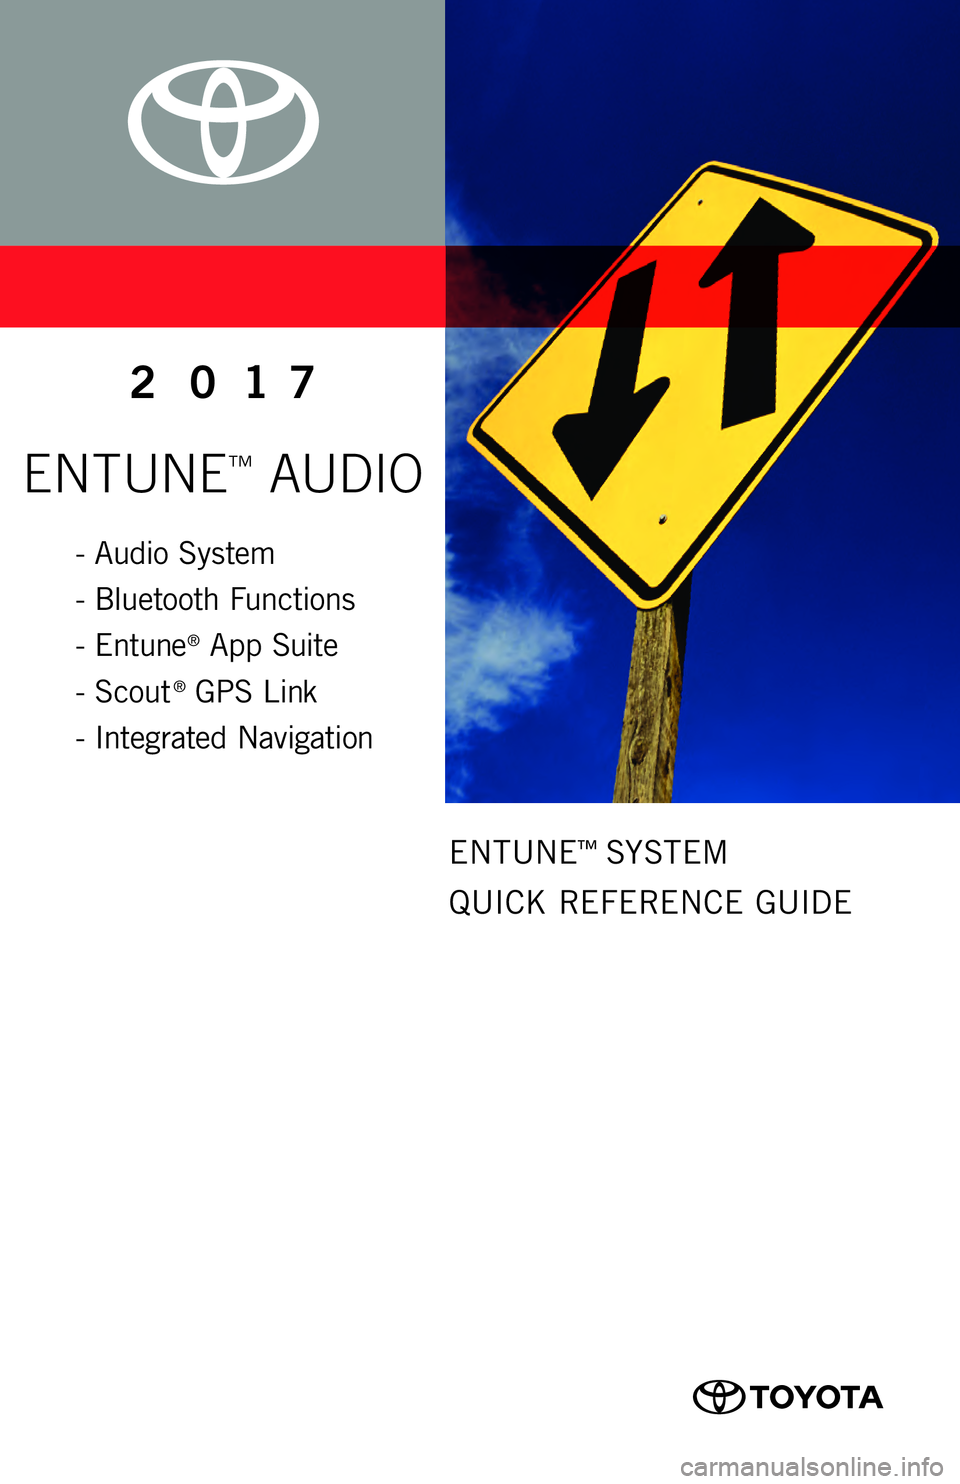 TOYOTA TACOMA 2017  Accessories, Audio & Navigation (in English) 0 0 5 0 5 N A V 17 E N P RE
ENTUNE™ AUDIO
2017
ENTUNE™ SYSTEM   
QUICK  REFERENCE  GUIDE
- Audio System
-
 B
 luetooth  Functions
-
 E

ntune
® App  Suite
-
 S

cout
® GPS  Link
-
 I

ntegrated 